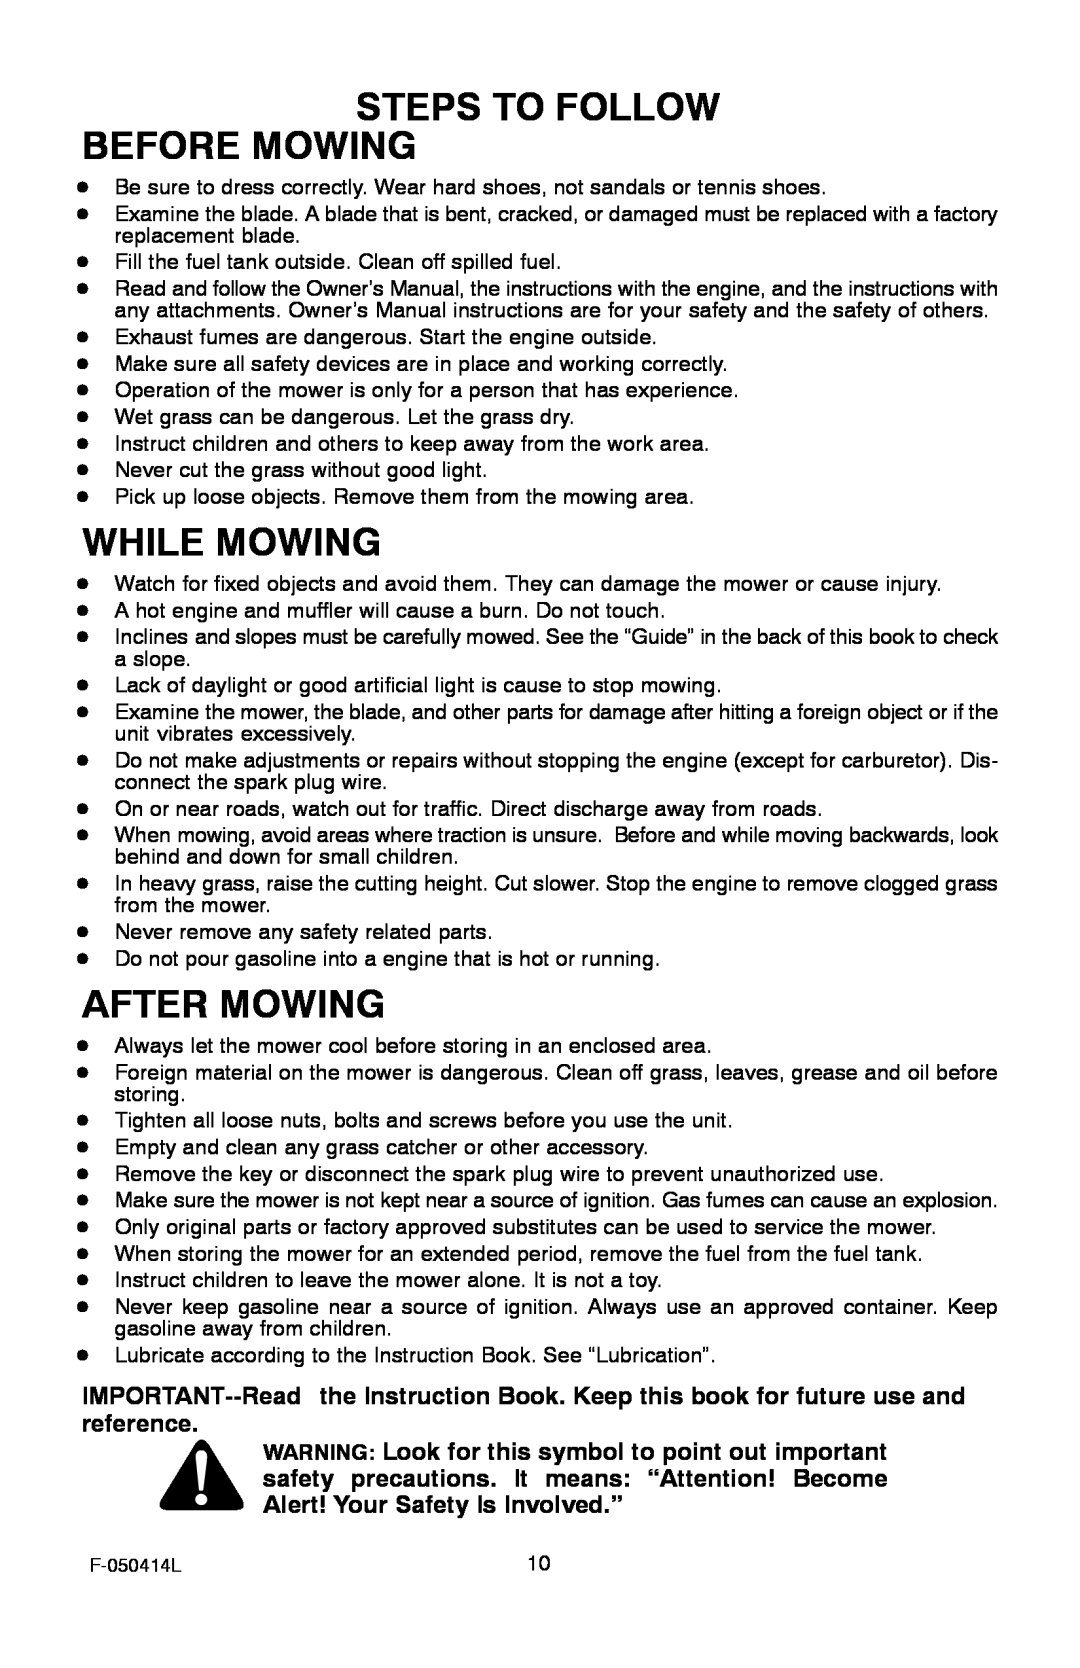 Adams 22 manual Steps To Follow Before Mowing, While Mowing, After Mowing 